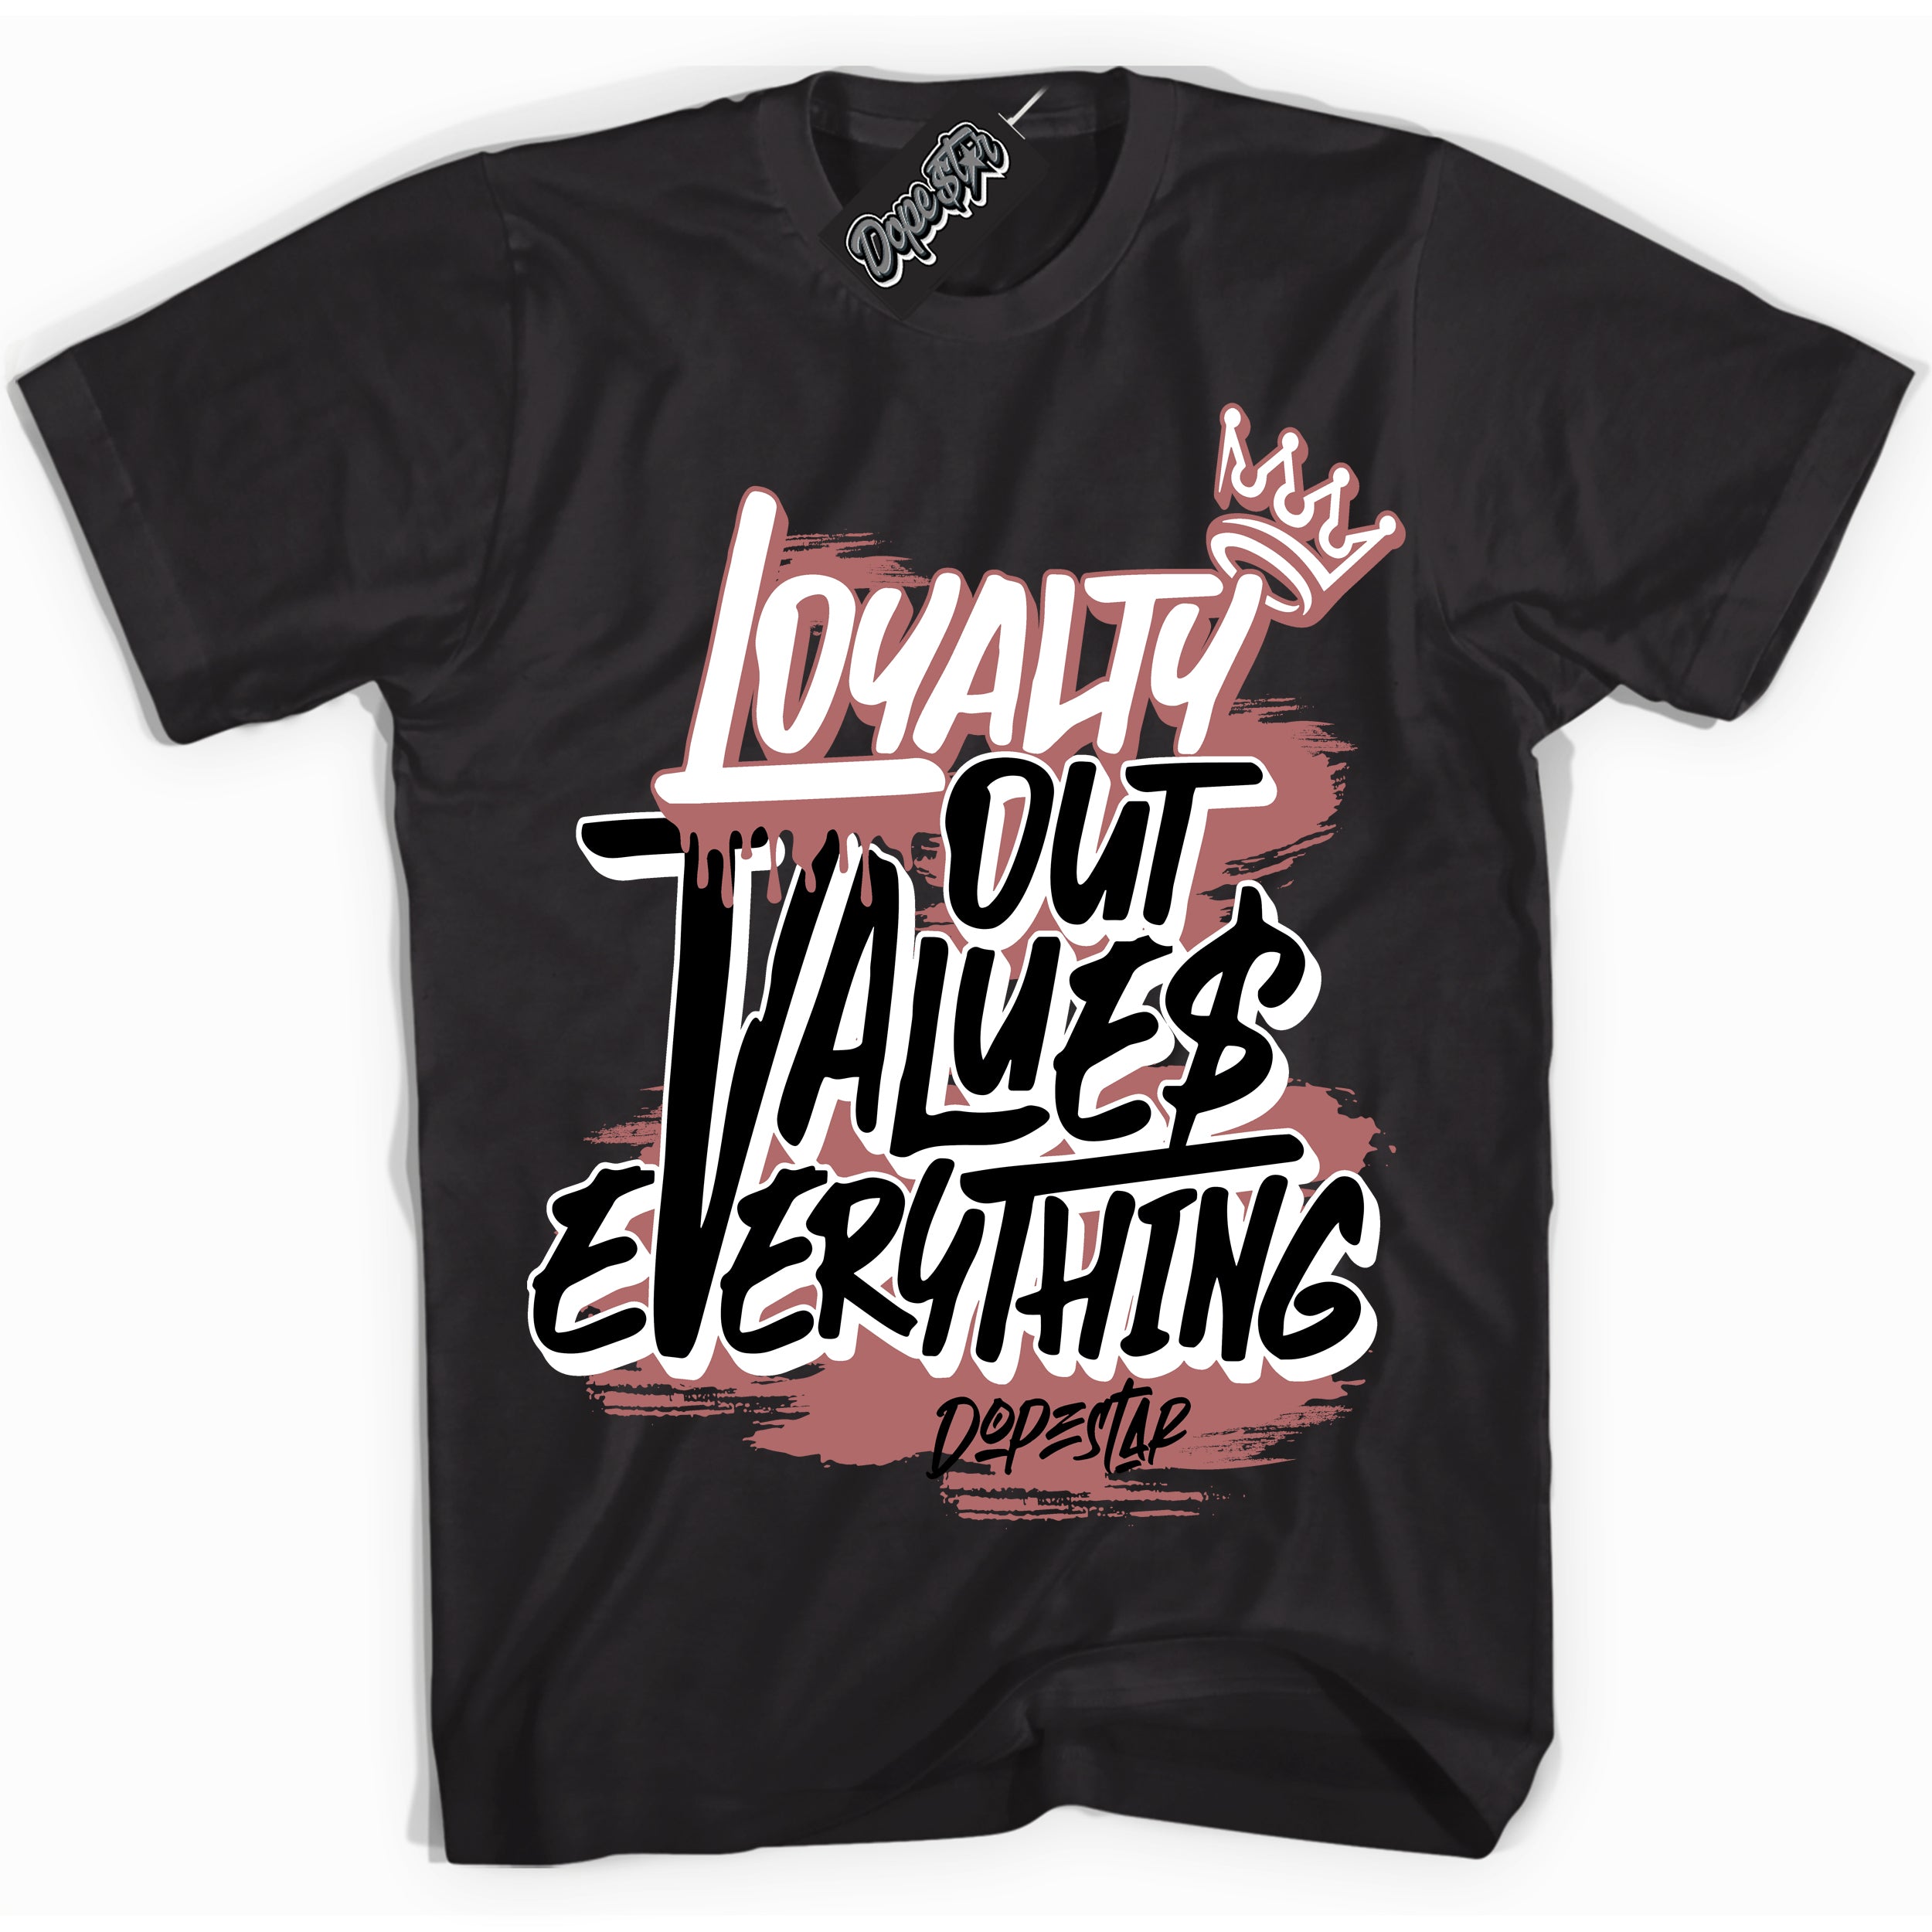 Cool Black Shirt with “ Loyalty Out Values Everything” design that perfectly matches Golf Rust Pink 1s Sneakers.